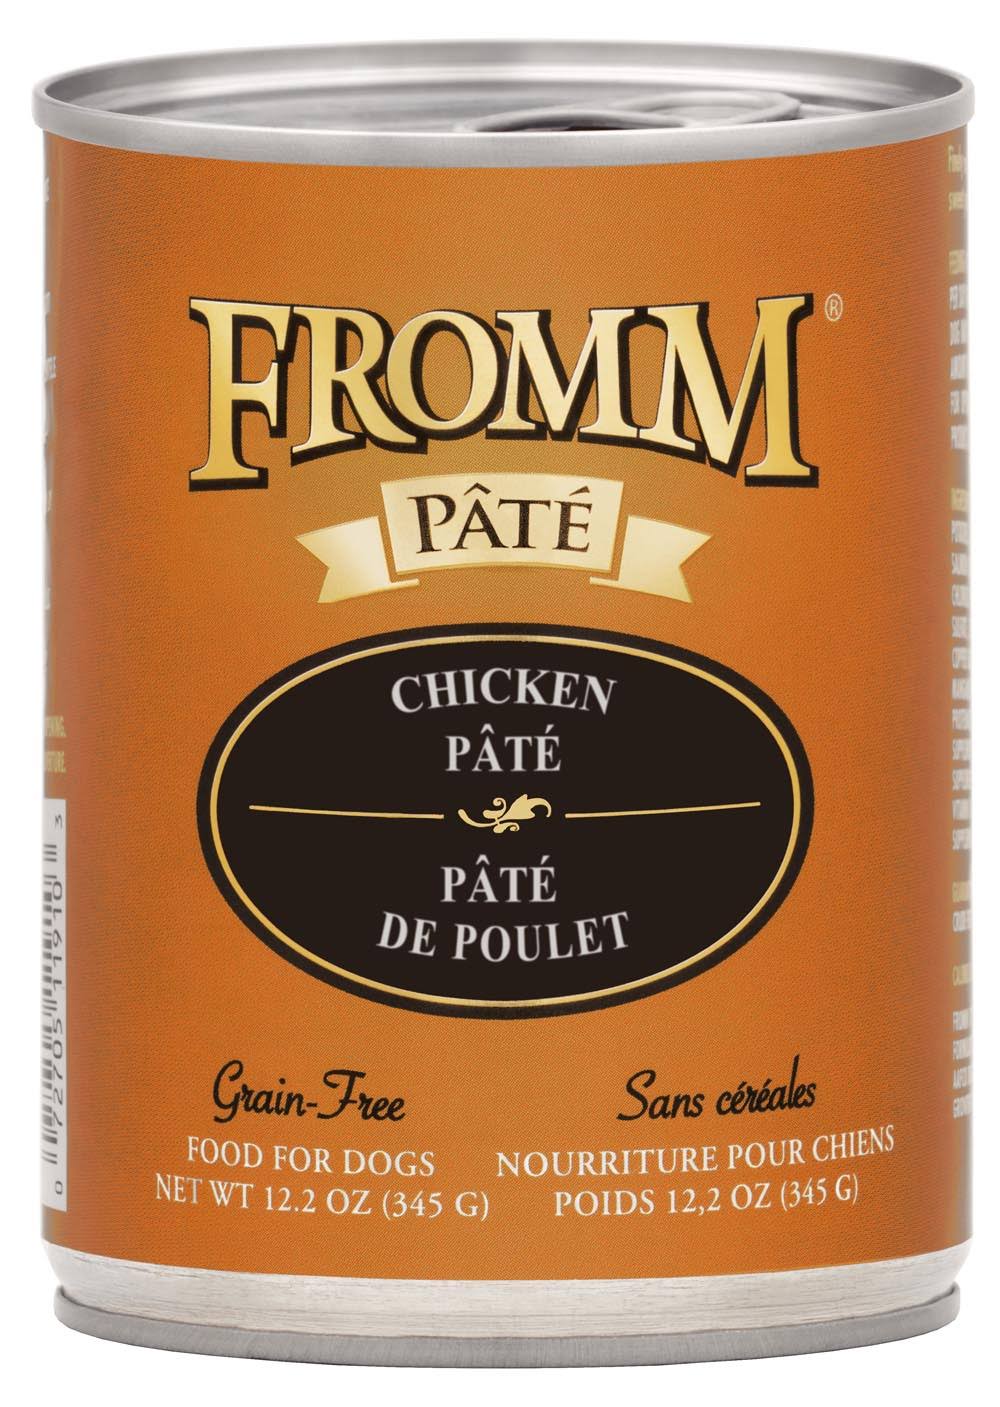 Fromm Chicken Pate Canned Dog Food, 12.2-oz